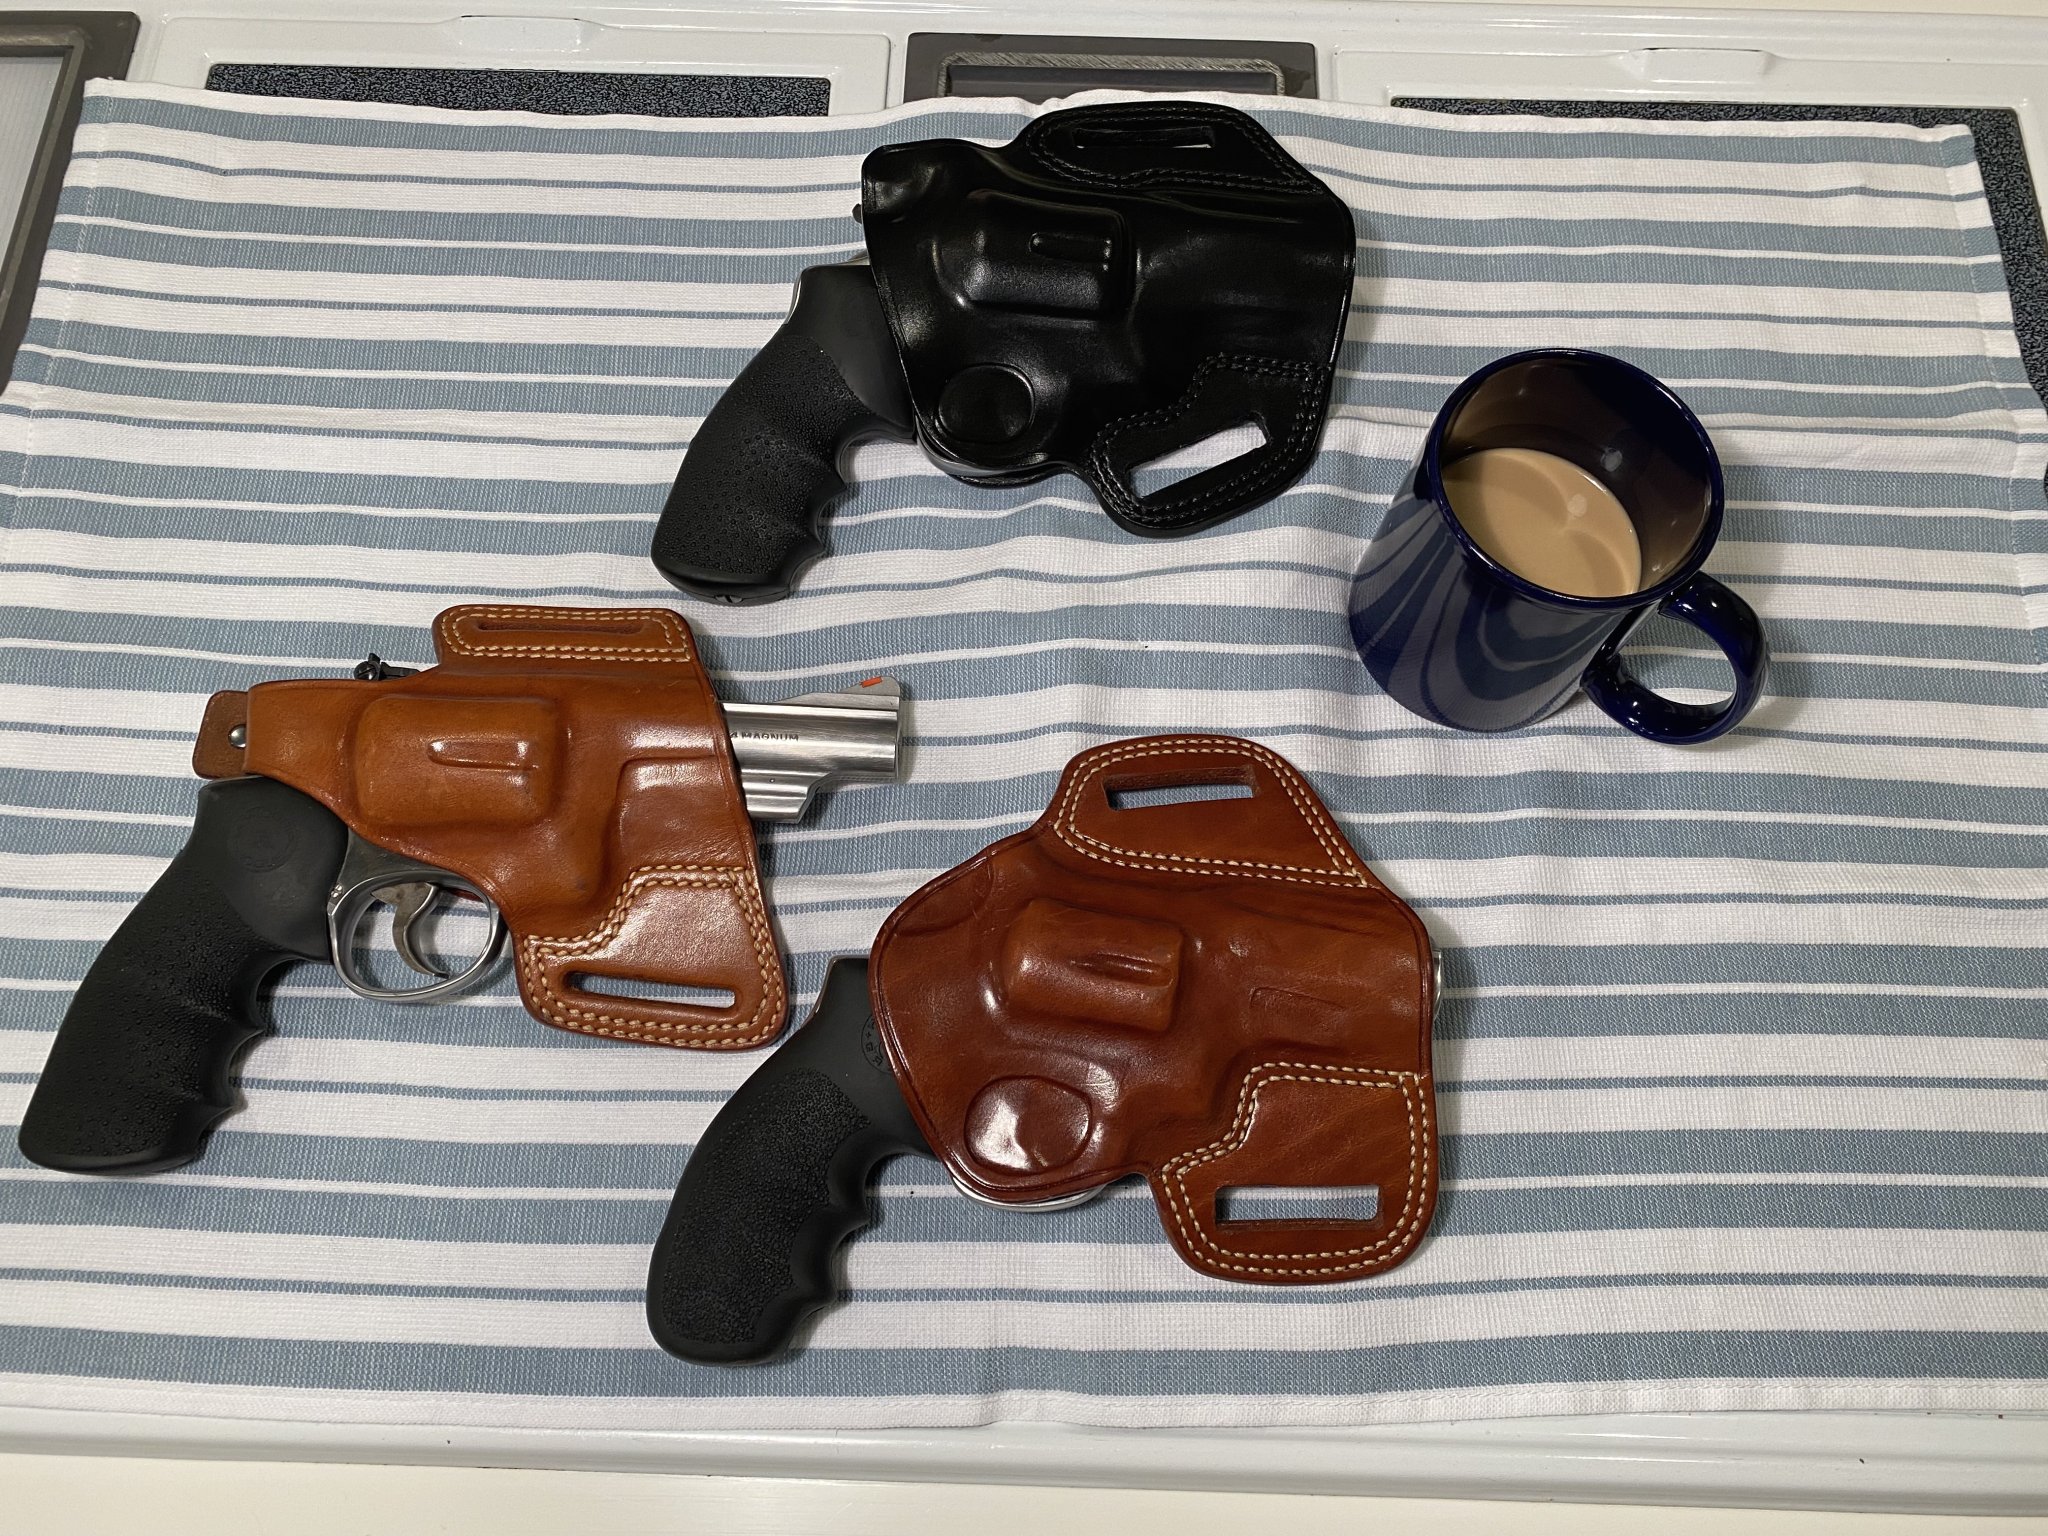 IMG_1791Smith & Wesson Models BackPacker Mountain 65-3 with Coffee Photos 2022.jpg